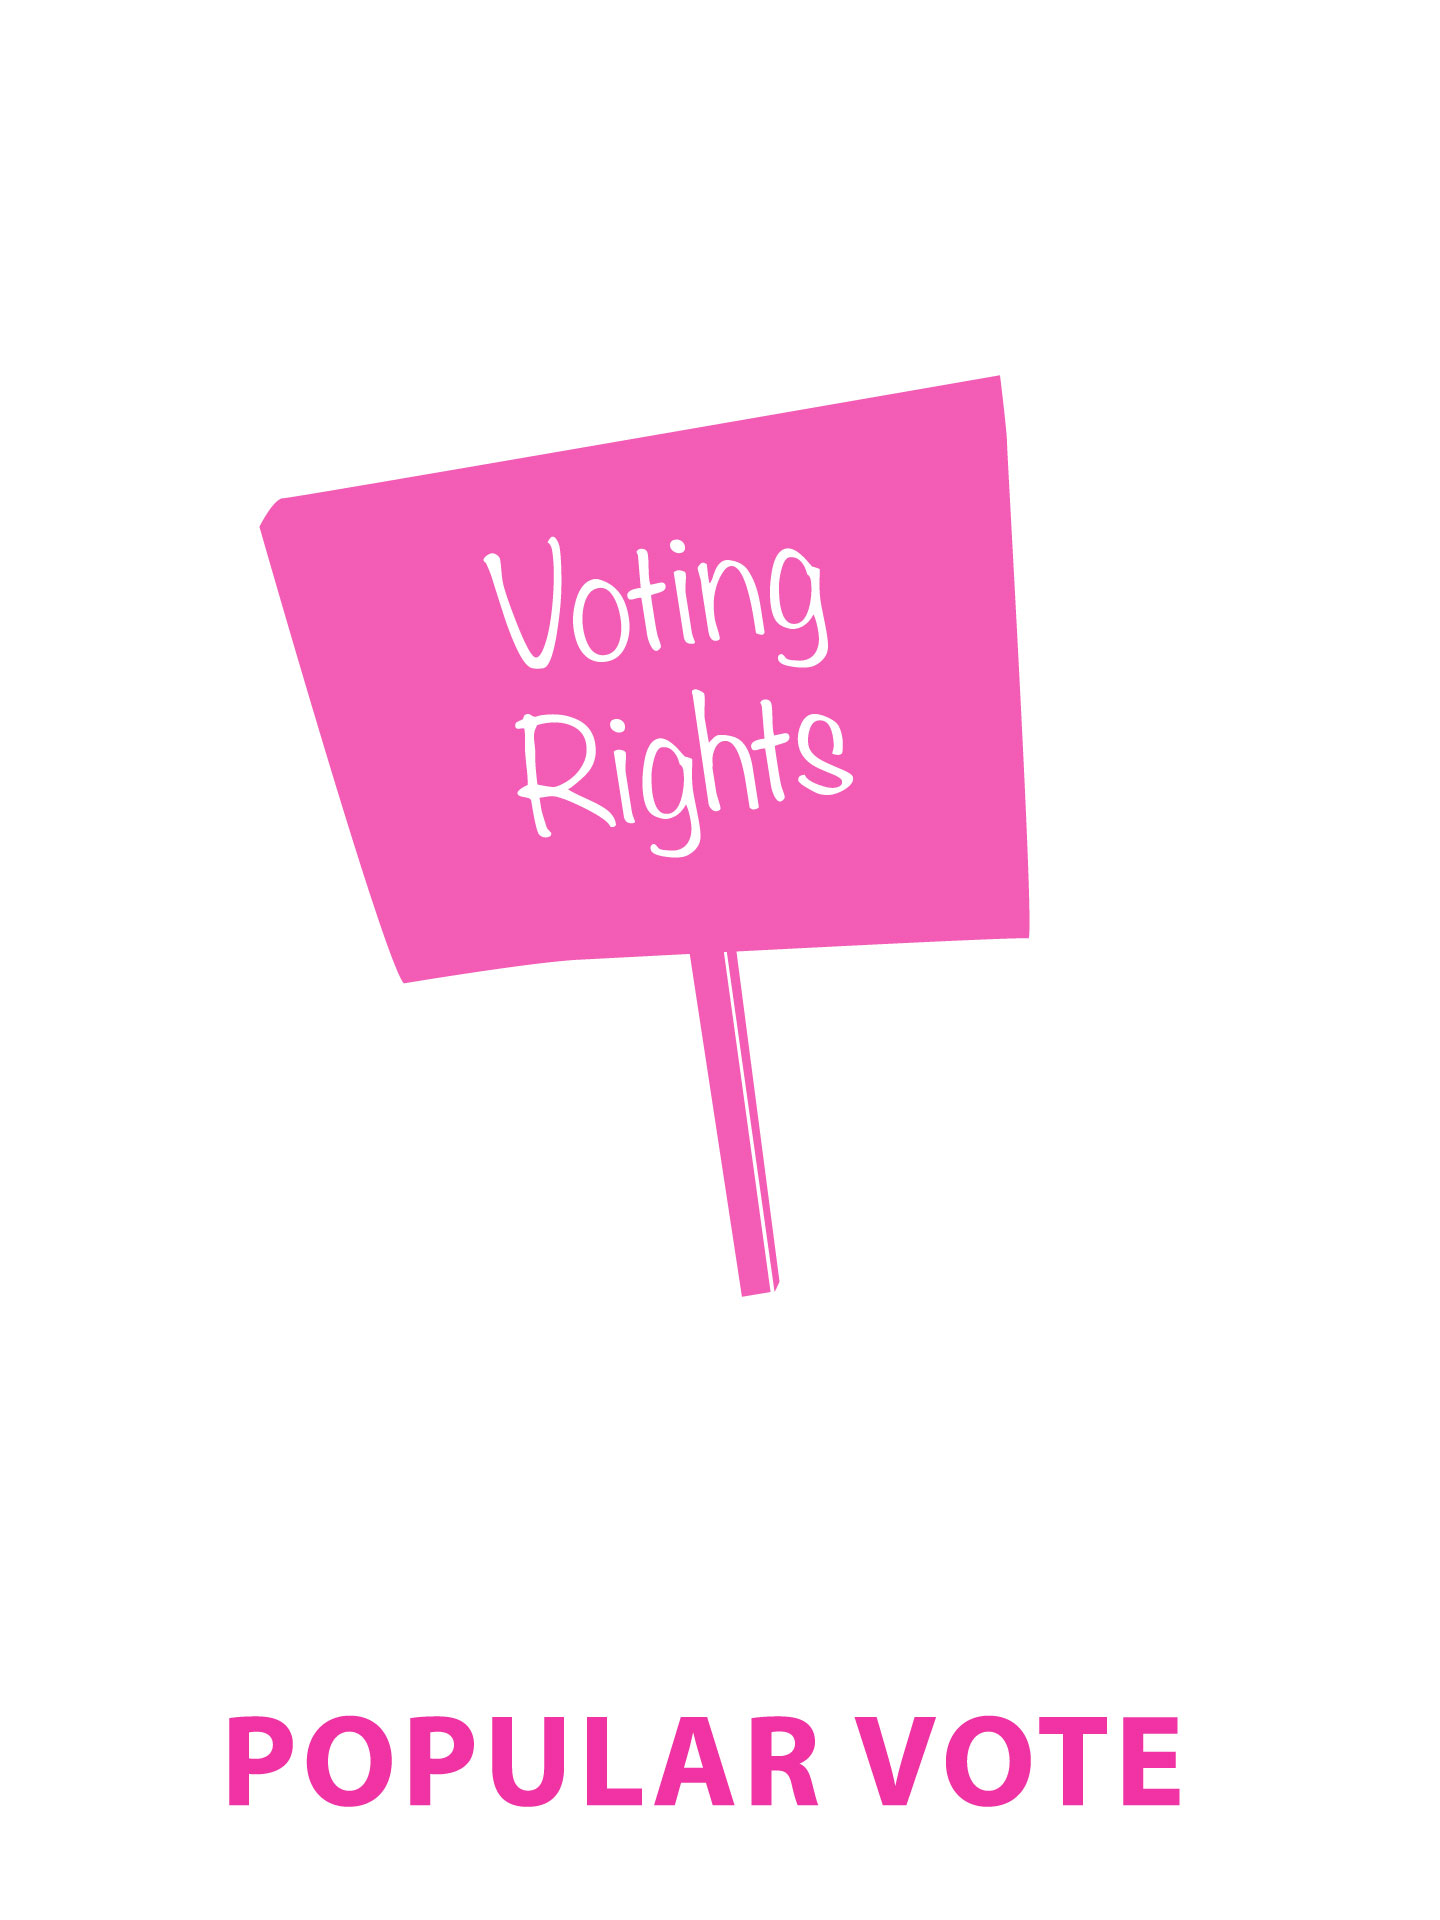 Illustration of Voting Rights by NFT Latinx Womnx decolonizing artist